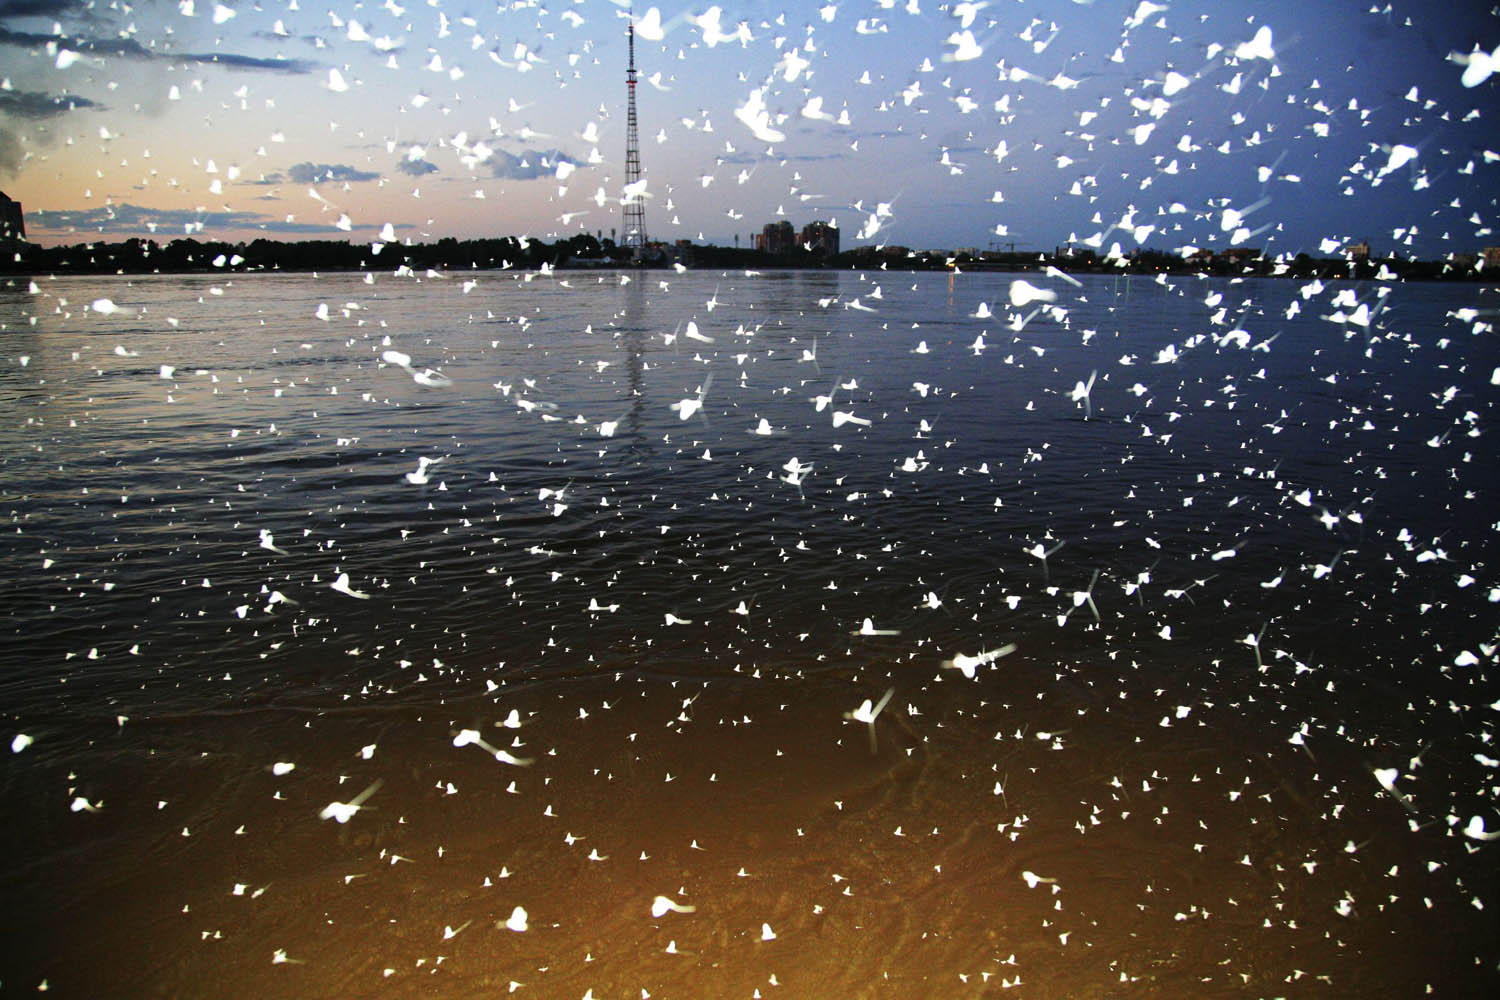 Mayflies are pictured above a river at dusk in Heihe